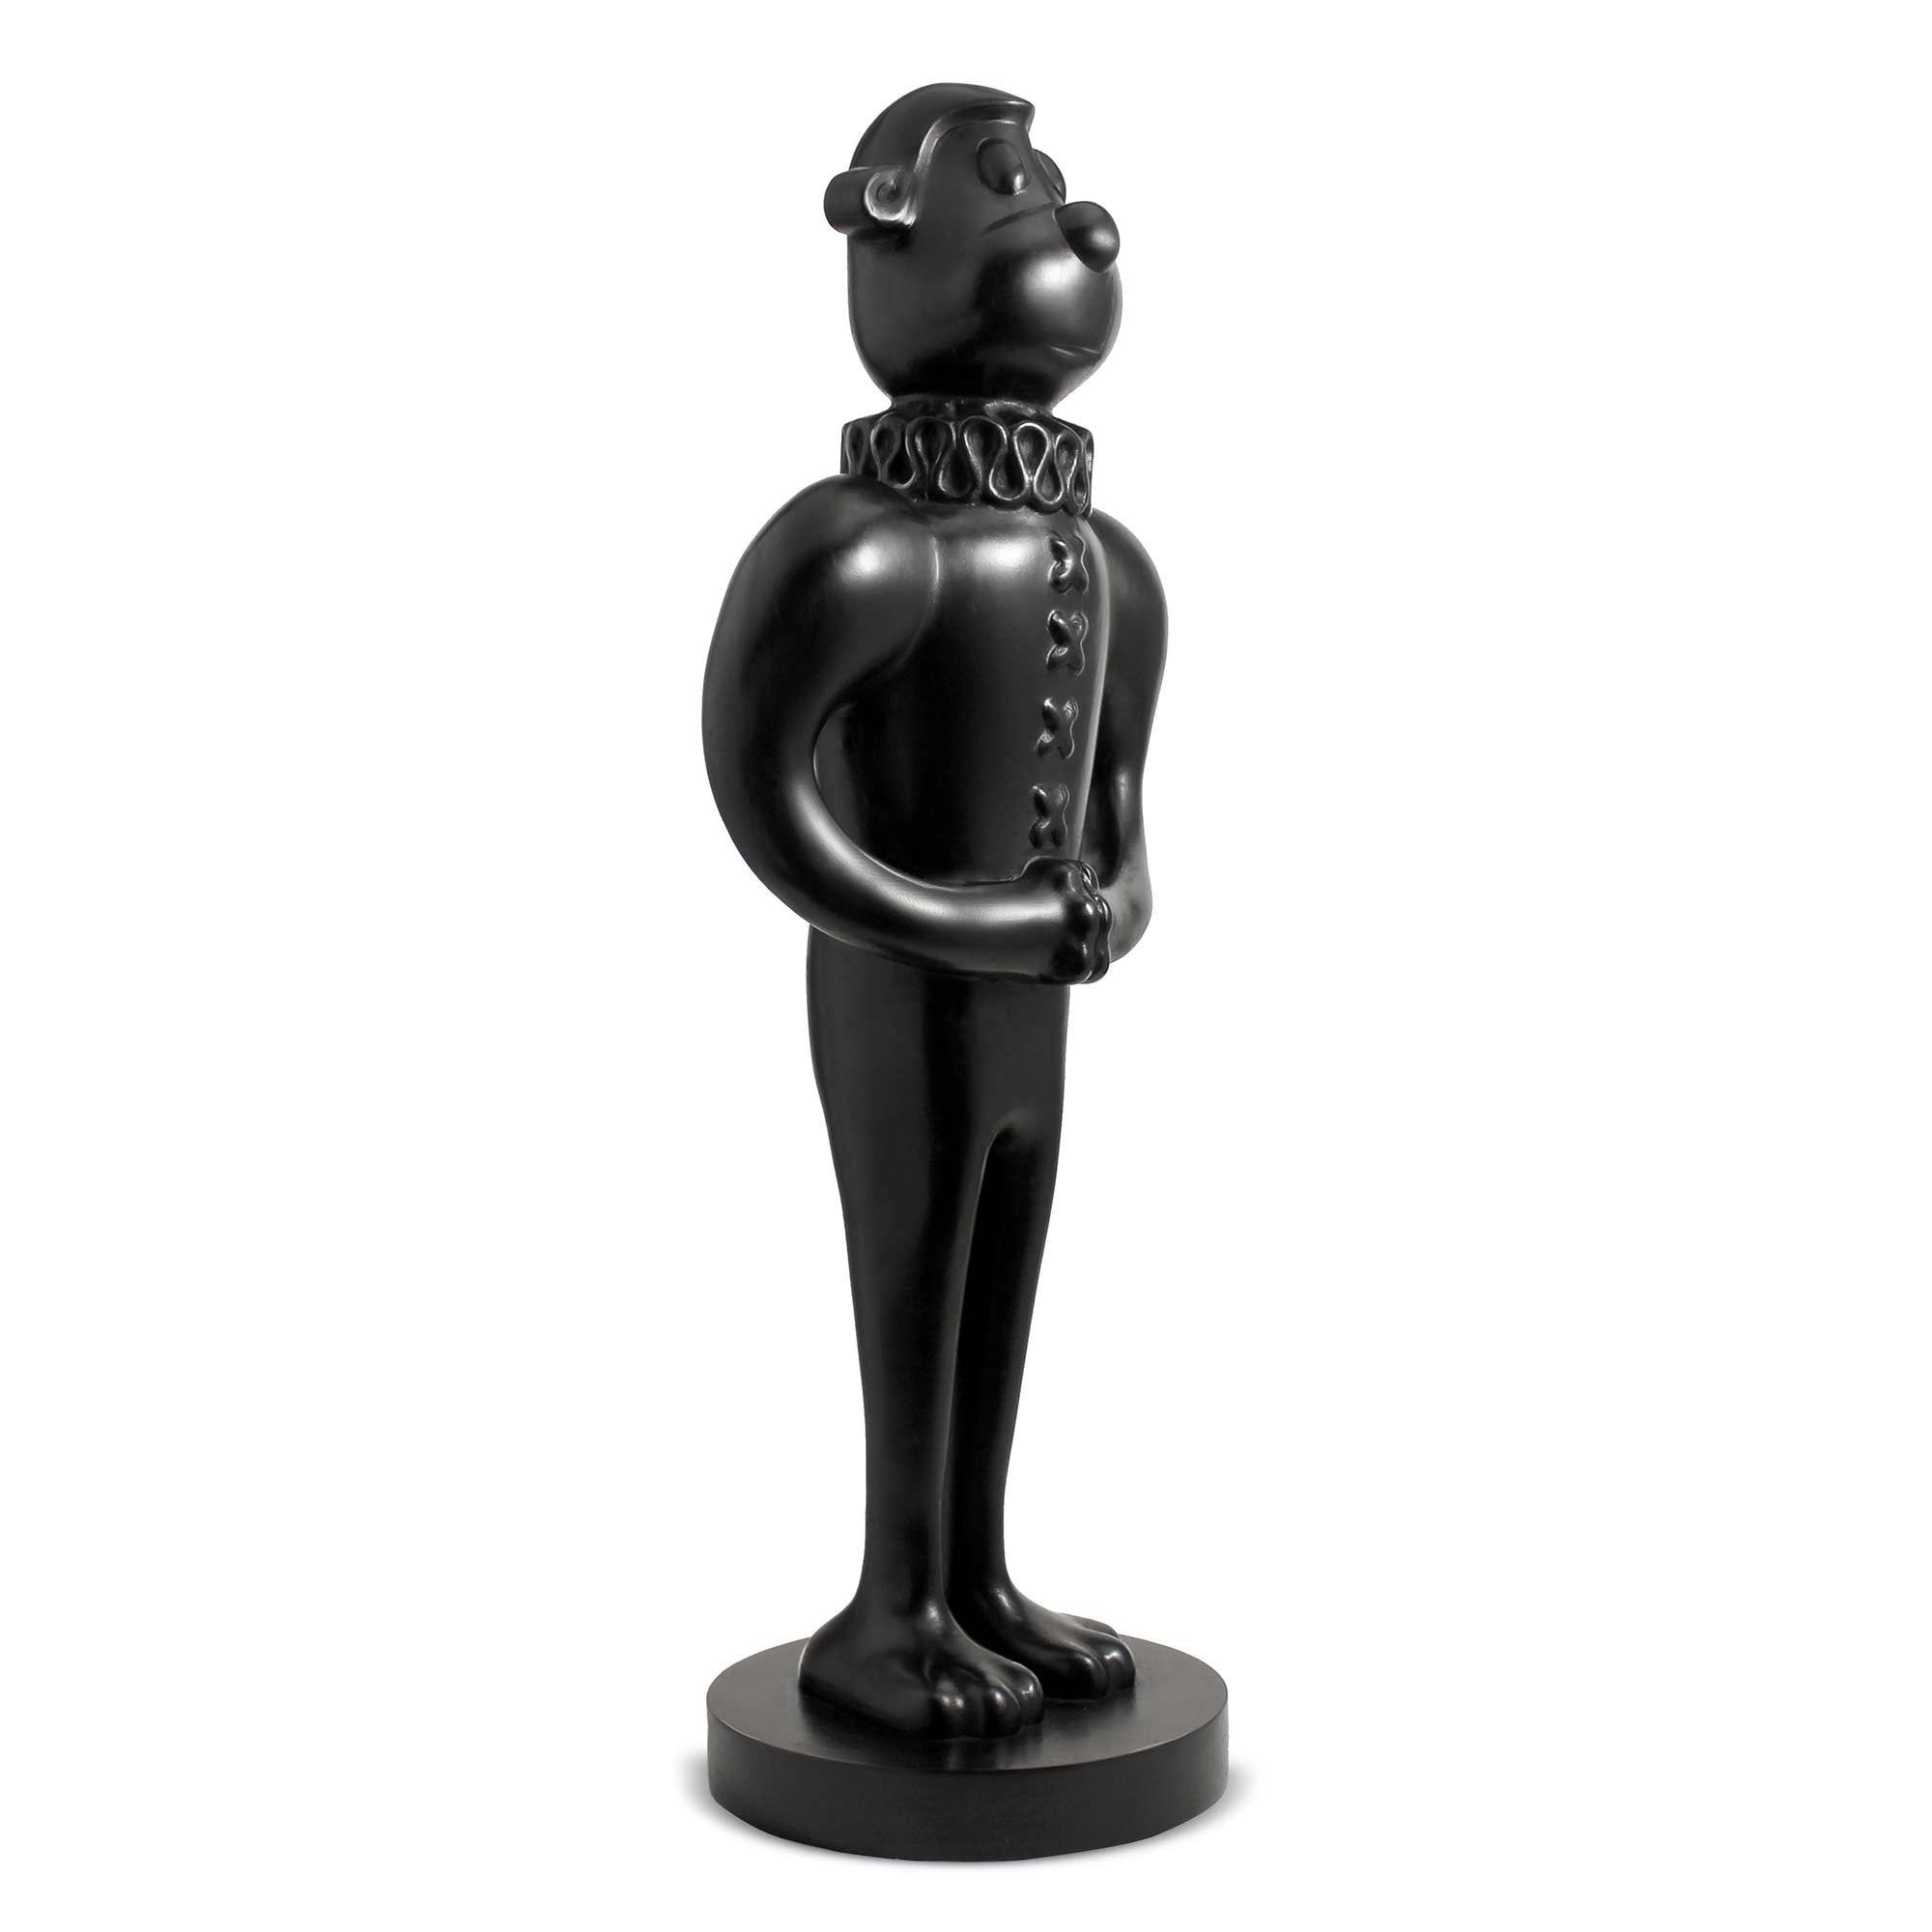 William, dog wood sculpture with black polished, by artist Ferdi B Dick, side view 2